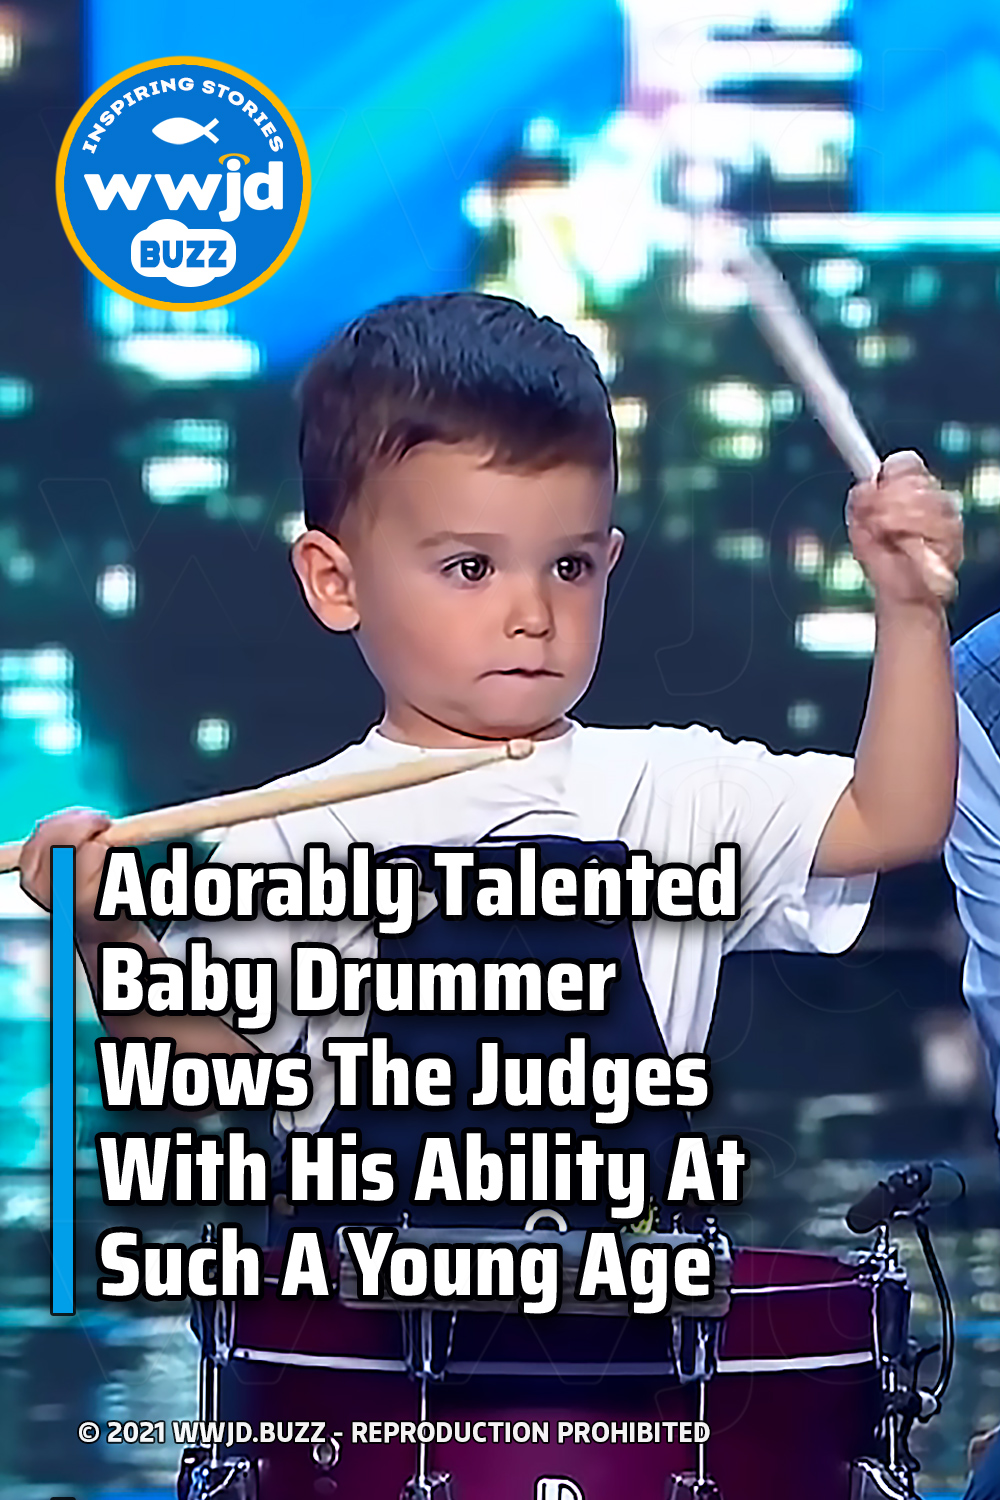 Adorably Talented Baby Drummer Wows The Judges With His Ability At Such A Young Age